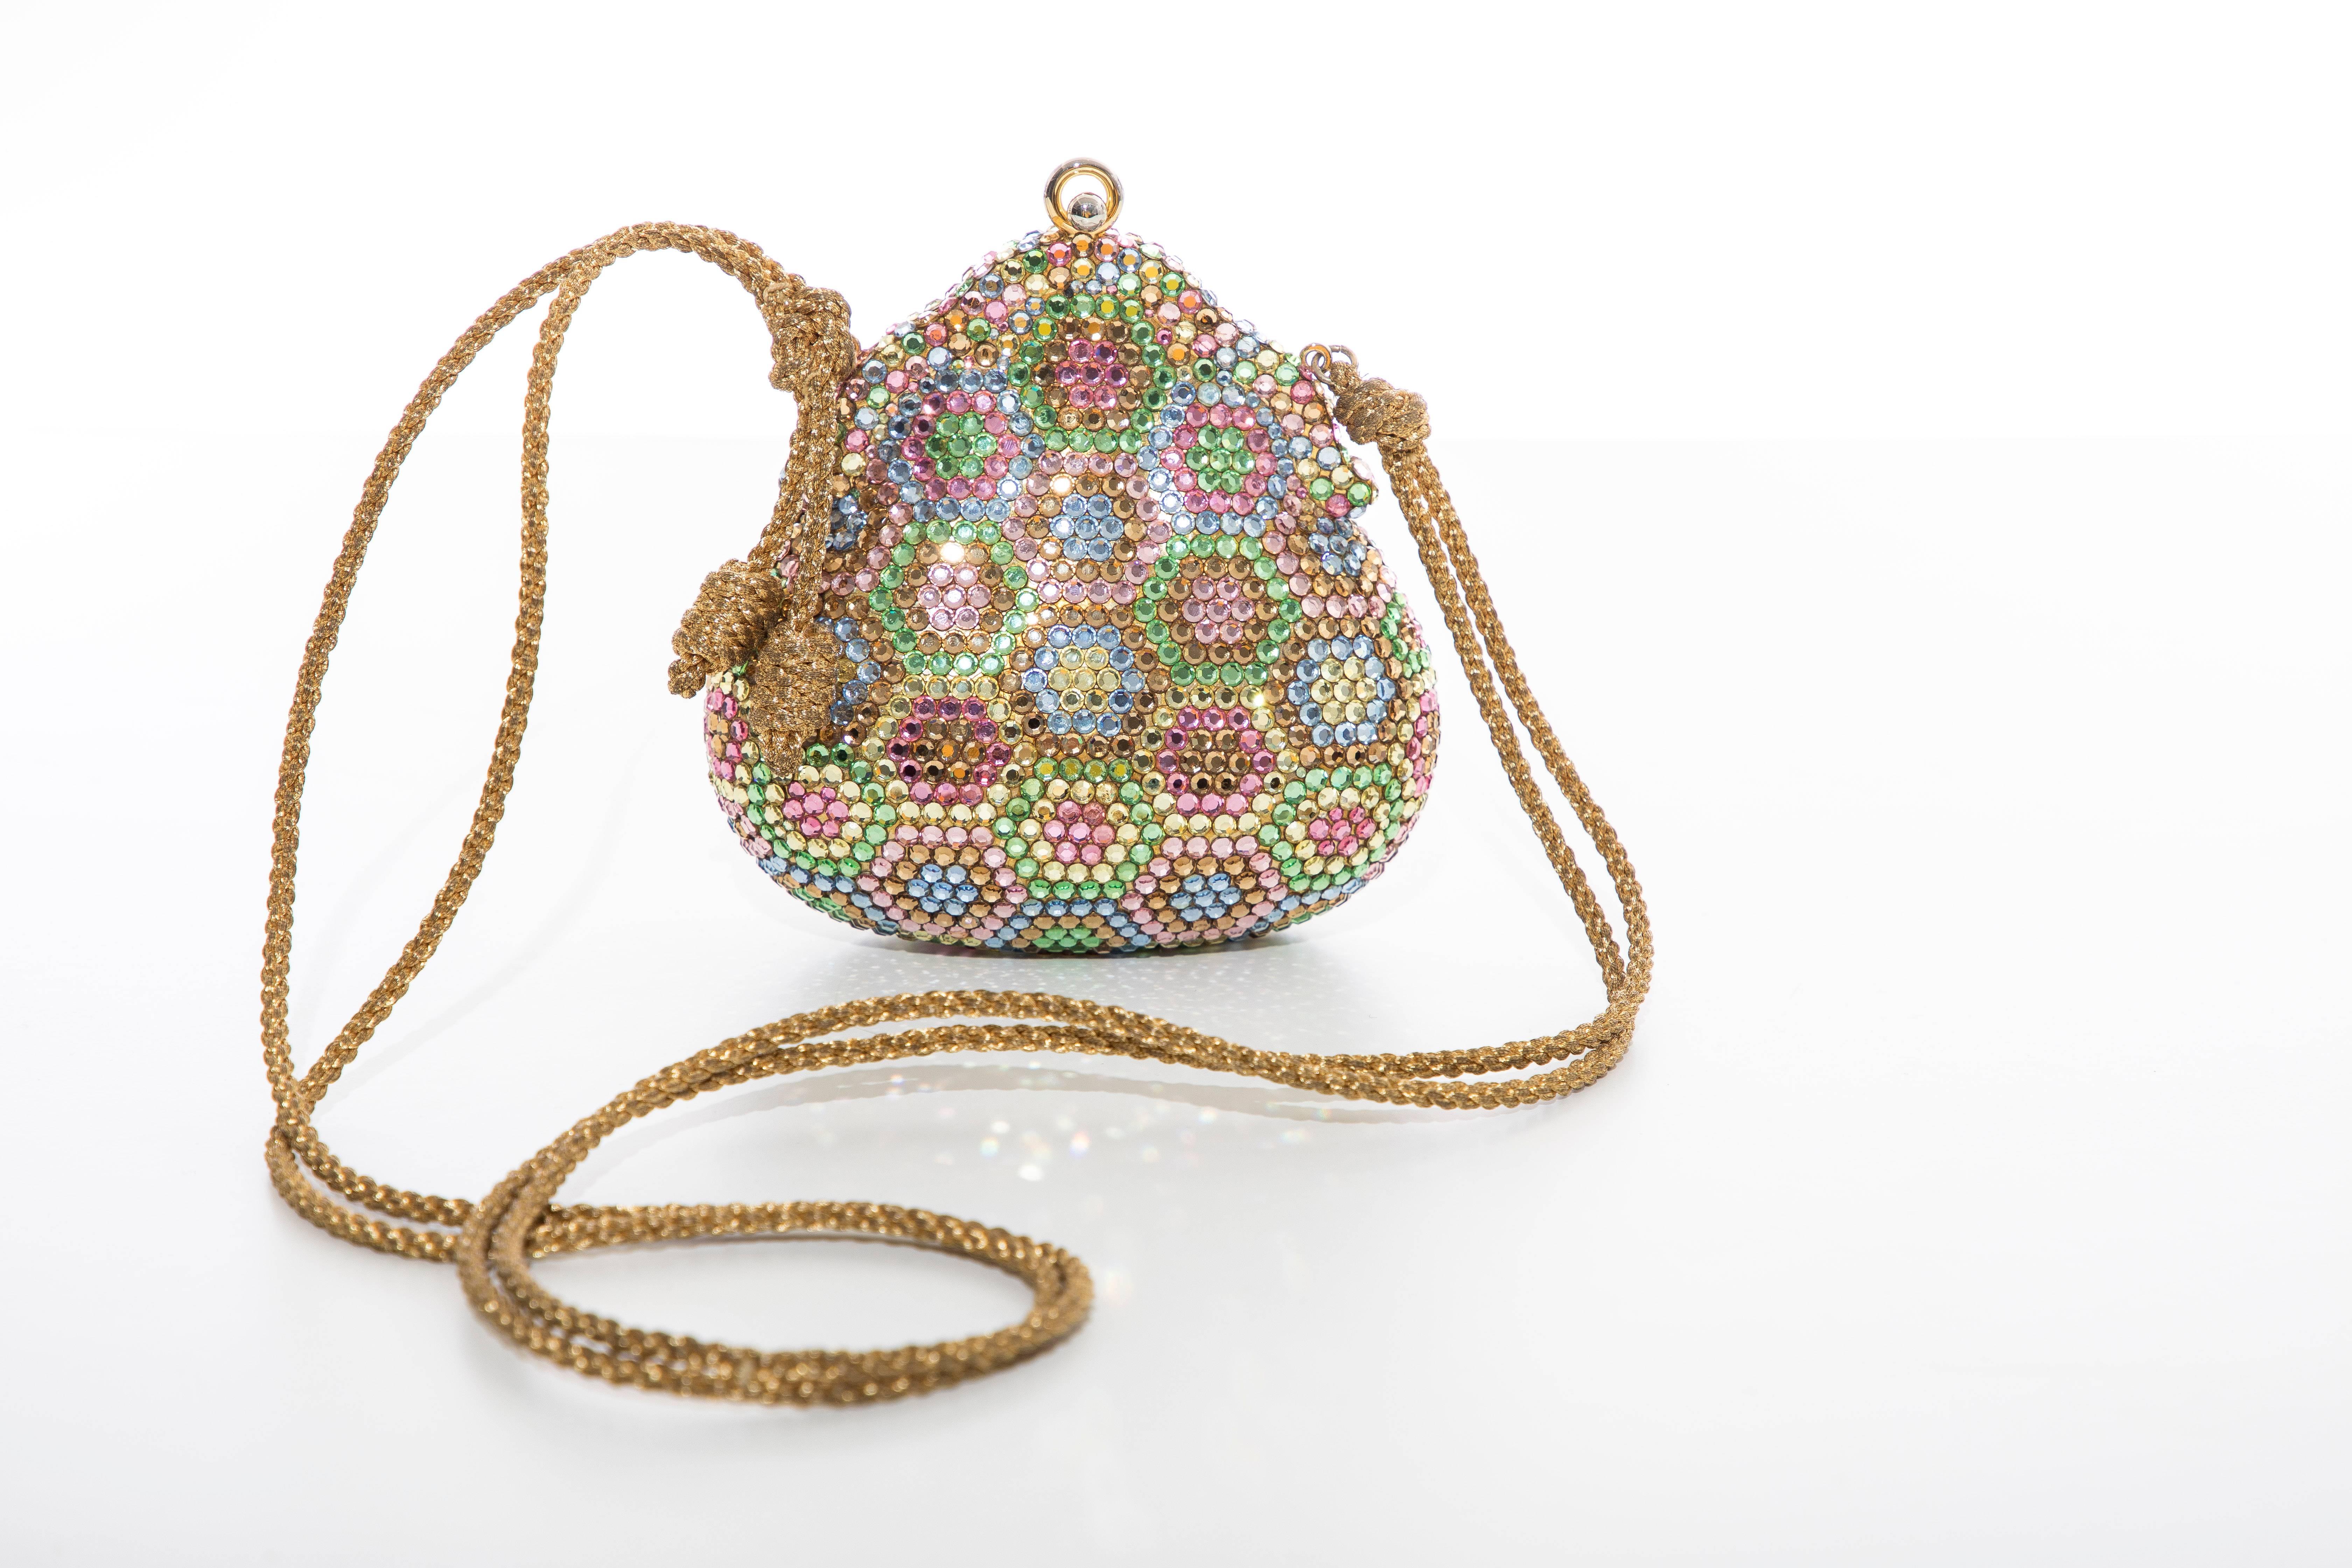 Judith Leiber, circa 1990,s crystal evening, minaudieres bag with gold cord strap, snap closure, comb, coin purse, mirror and fully lined in gold leather. Includes dust bag.

Width: 5, Length: 5, With Strap 21, Depth: 1.5